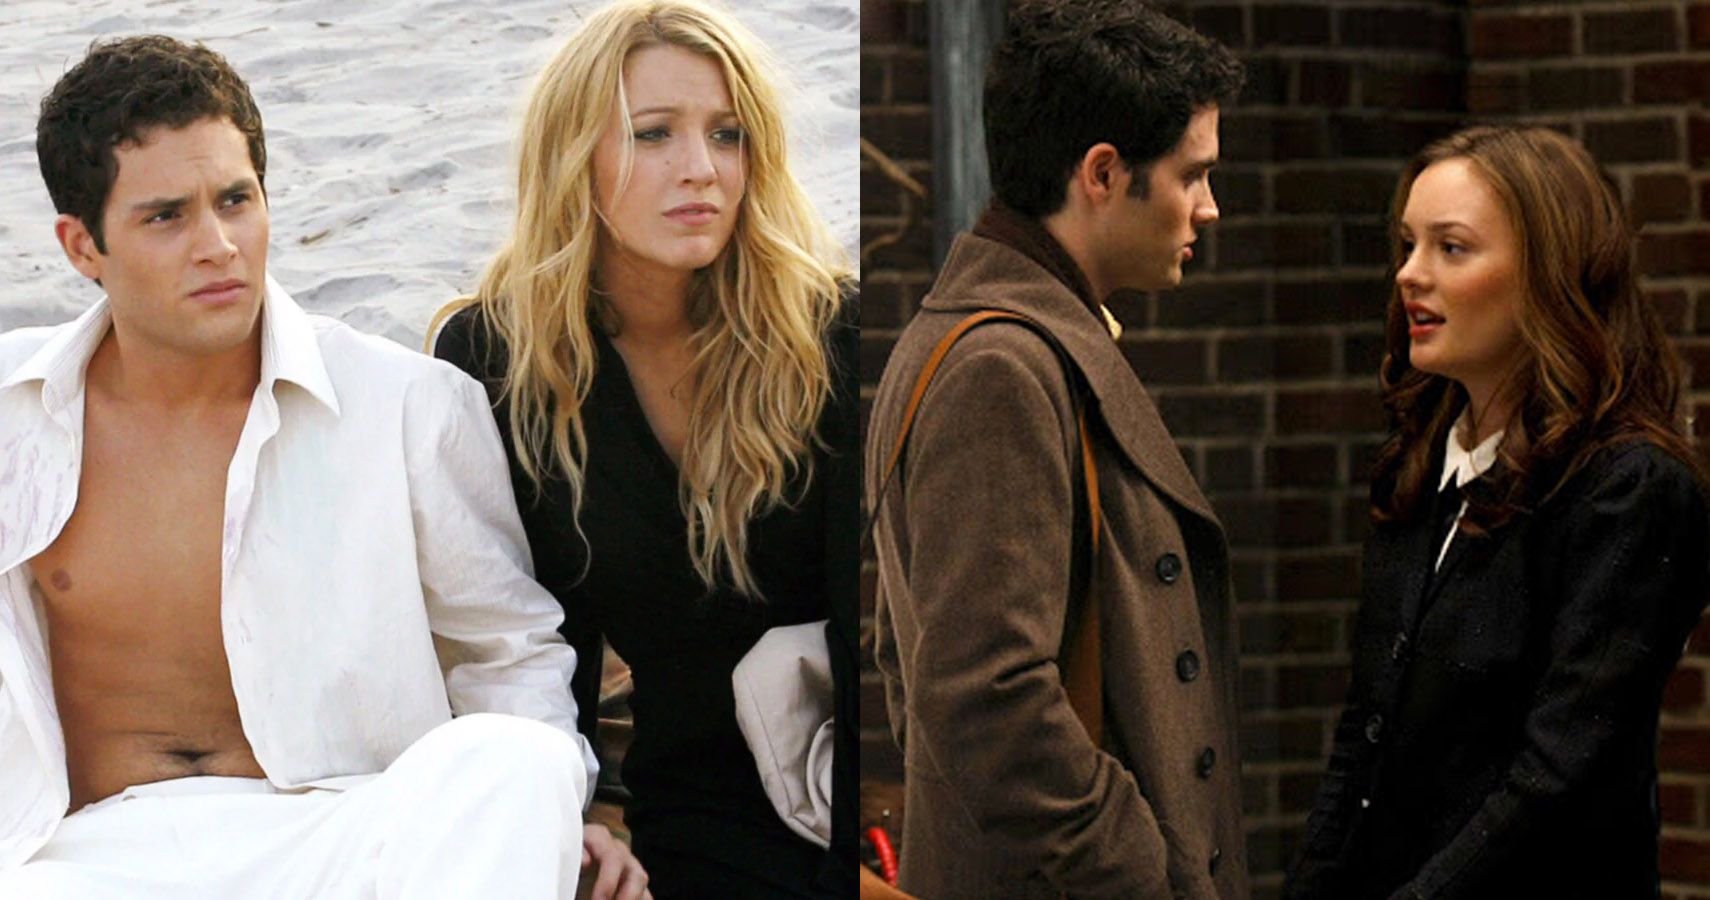 Gossip Girl's identity changed near end and season five shows who